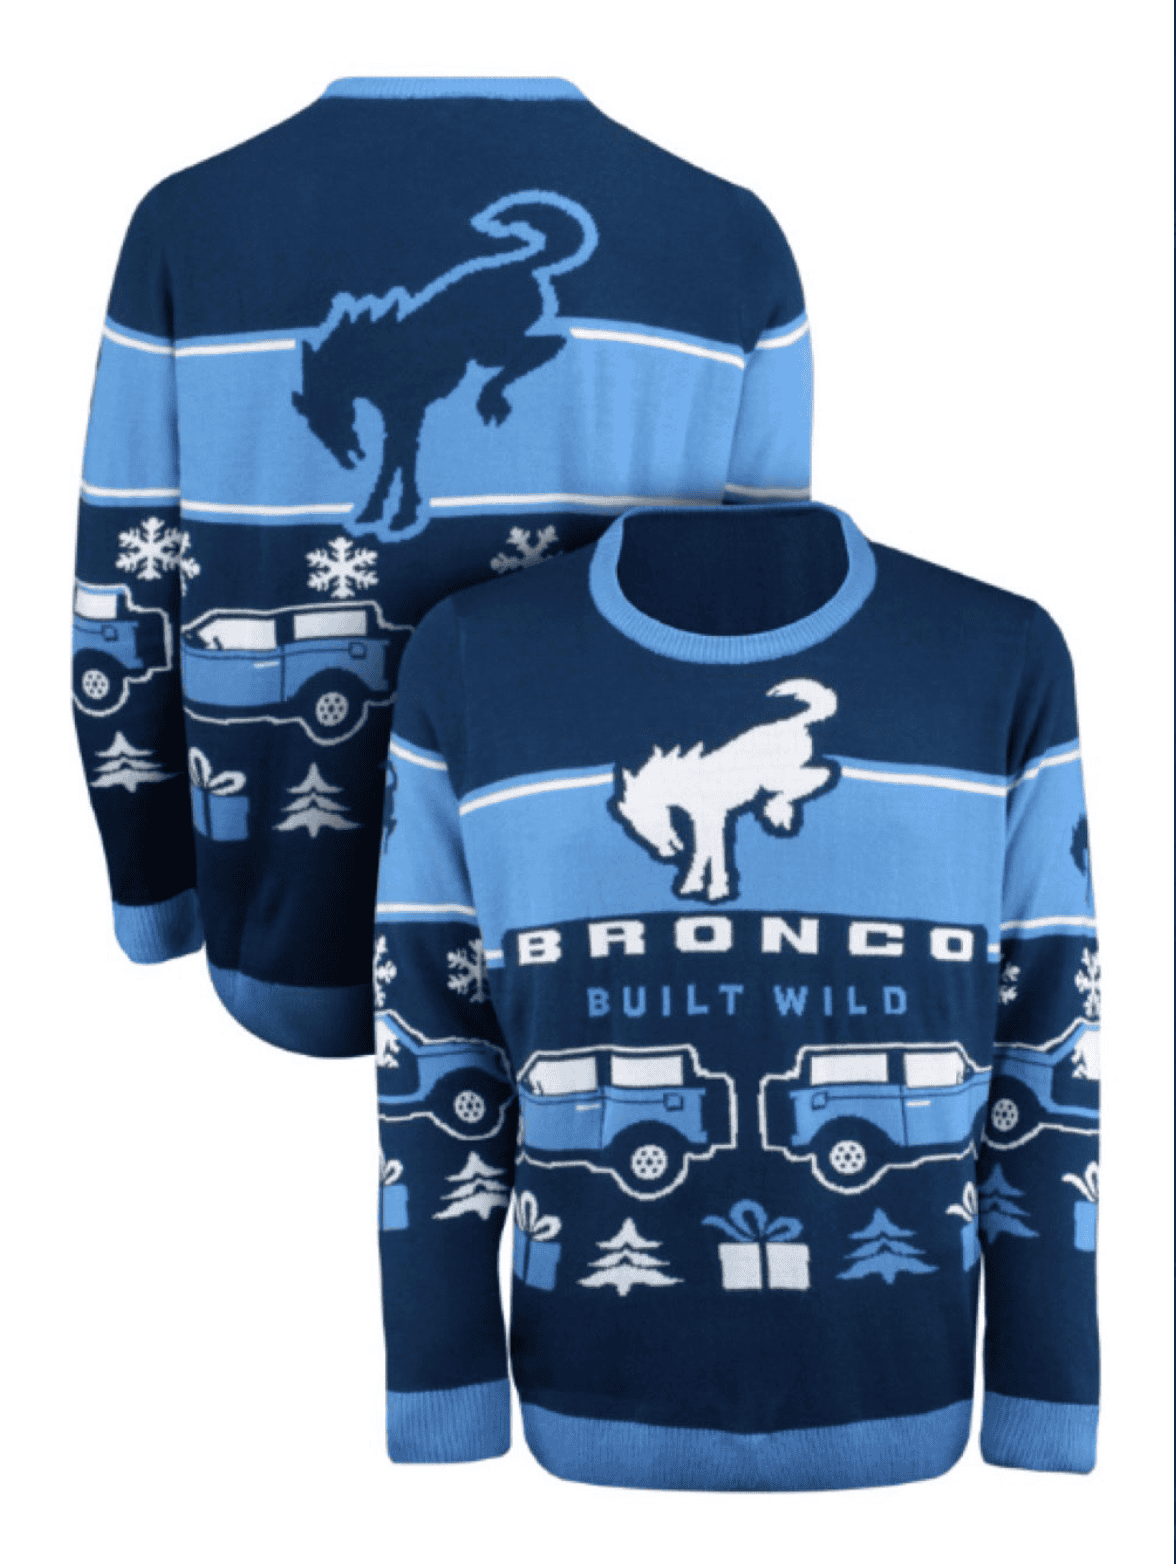 Ford Bronco The Holiday Bronco Sweater Is Here! Deer sweater